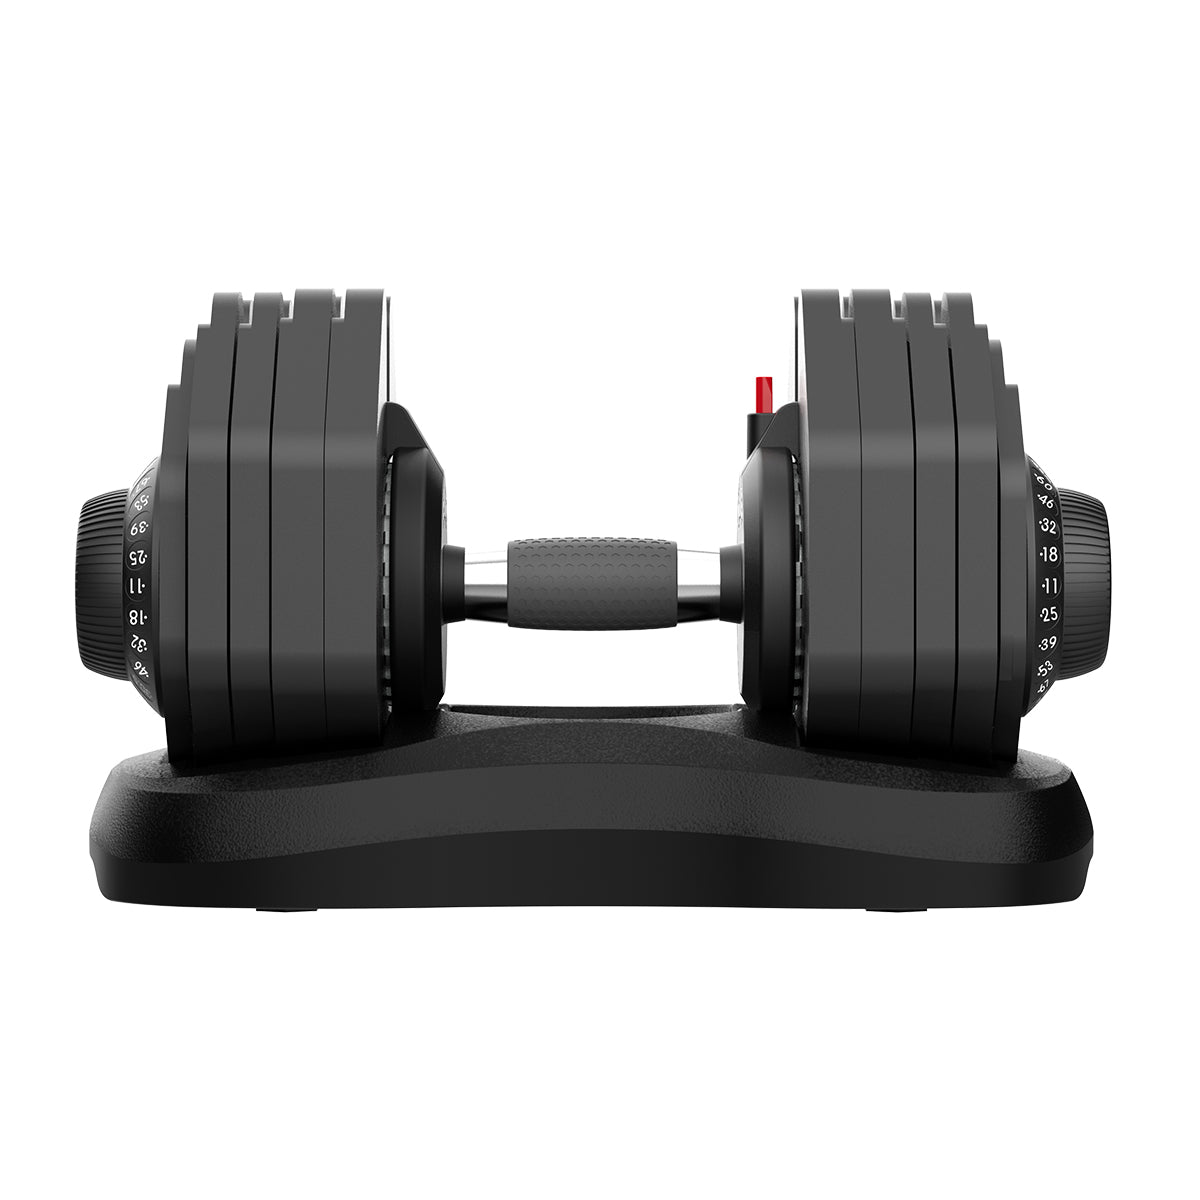 Adjustable Dumbbell DT1188 88 lbs